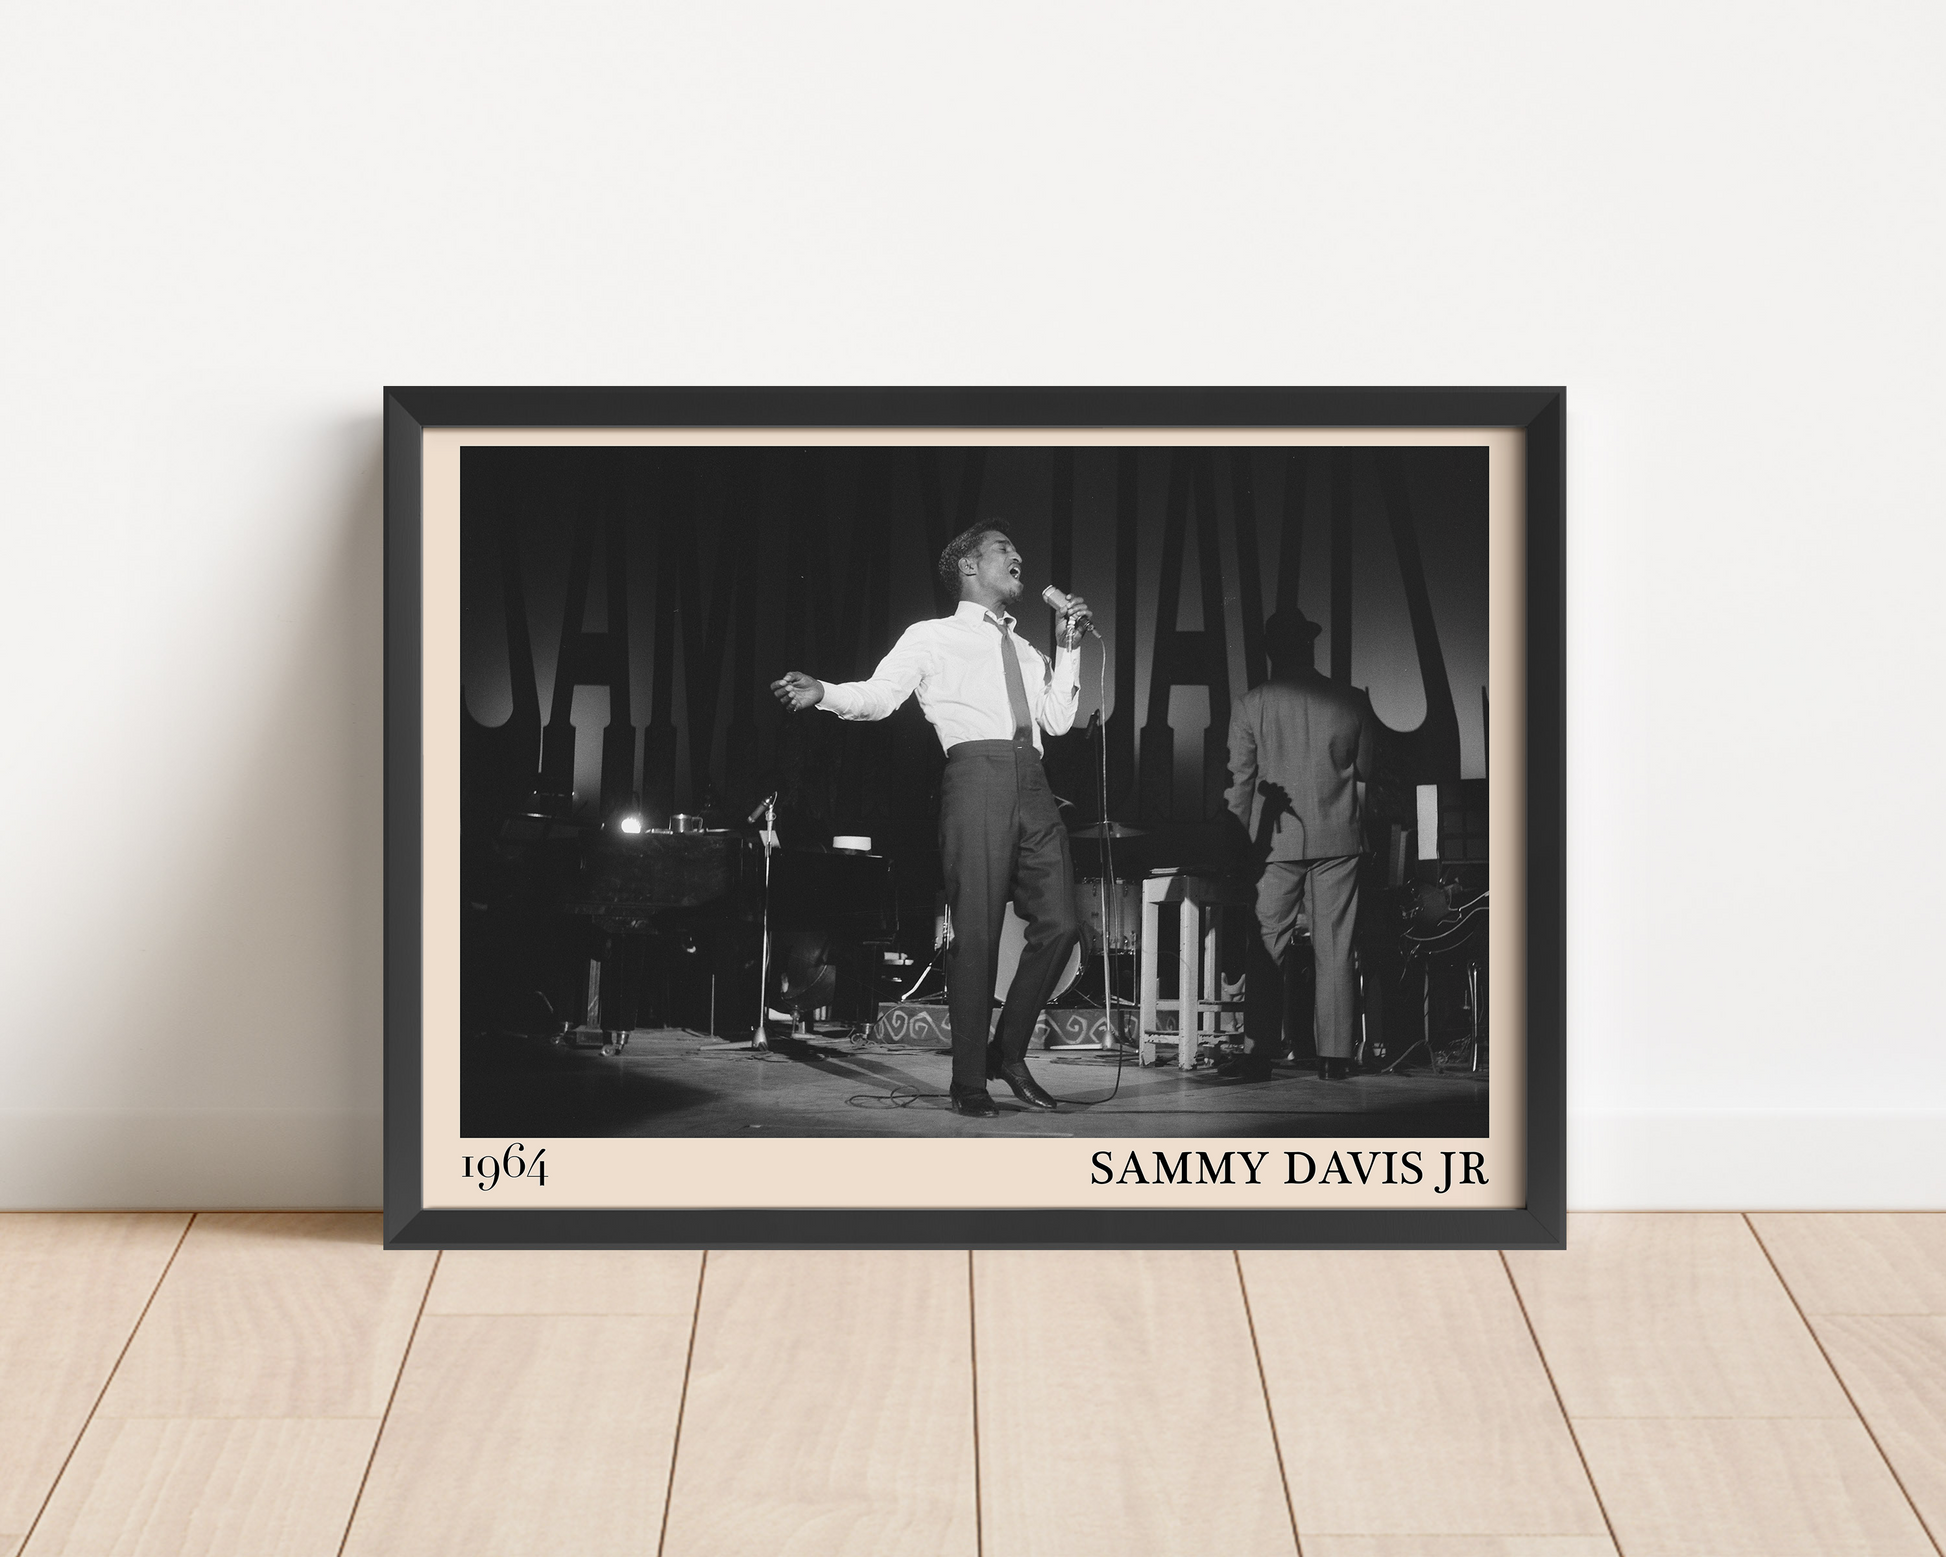 1964 picture of Sammy Davis Jr. Picture crafted into a black framed poster, with an off-white border. Poster is propped against a white wall